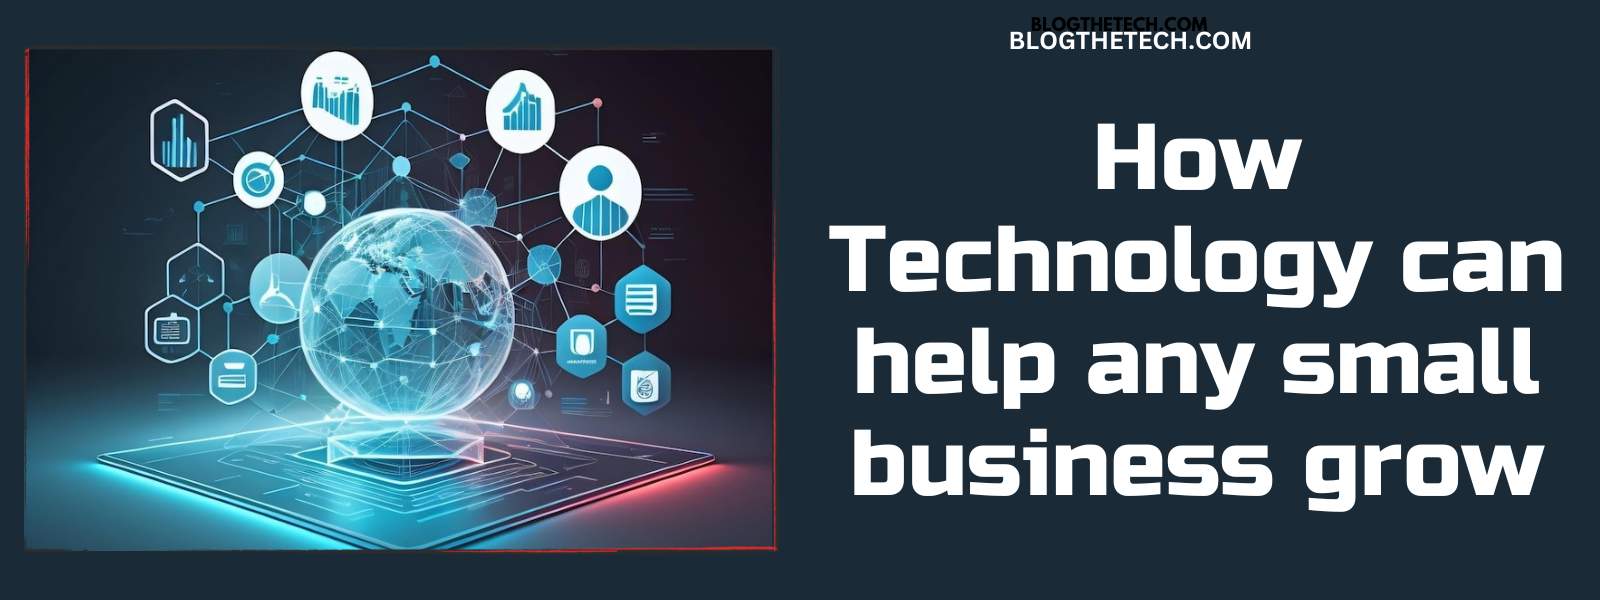 How-Technology-Help-Small-Business-Grow-Featured